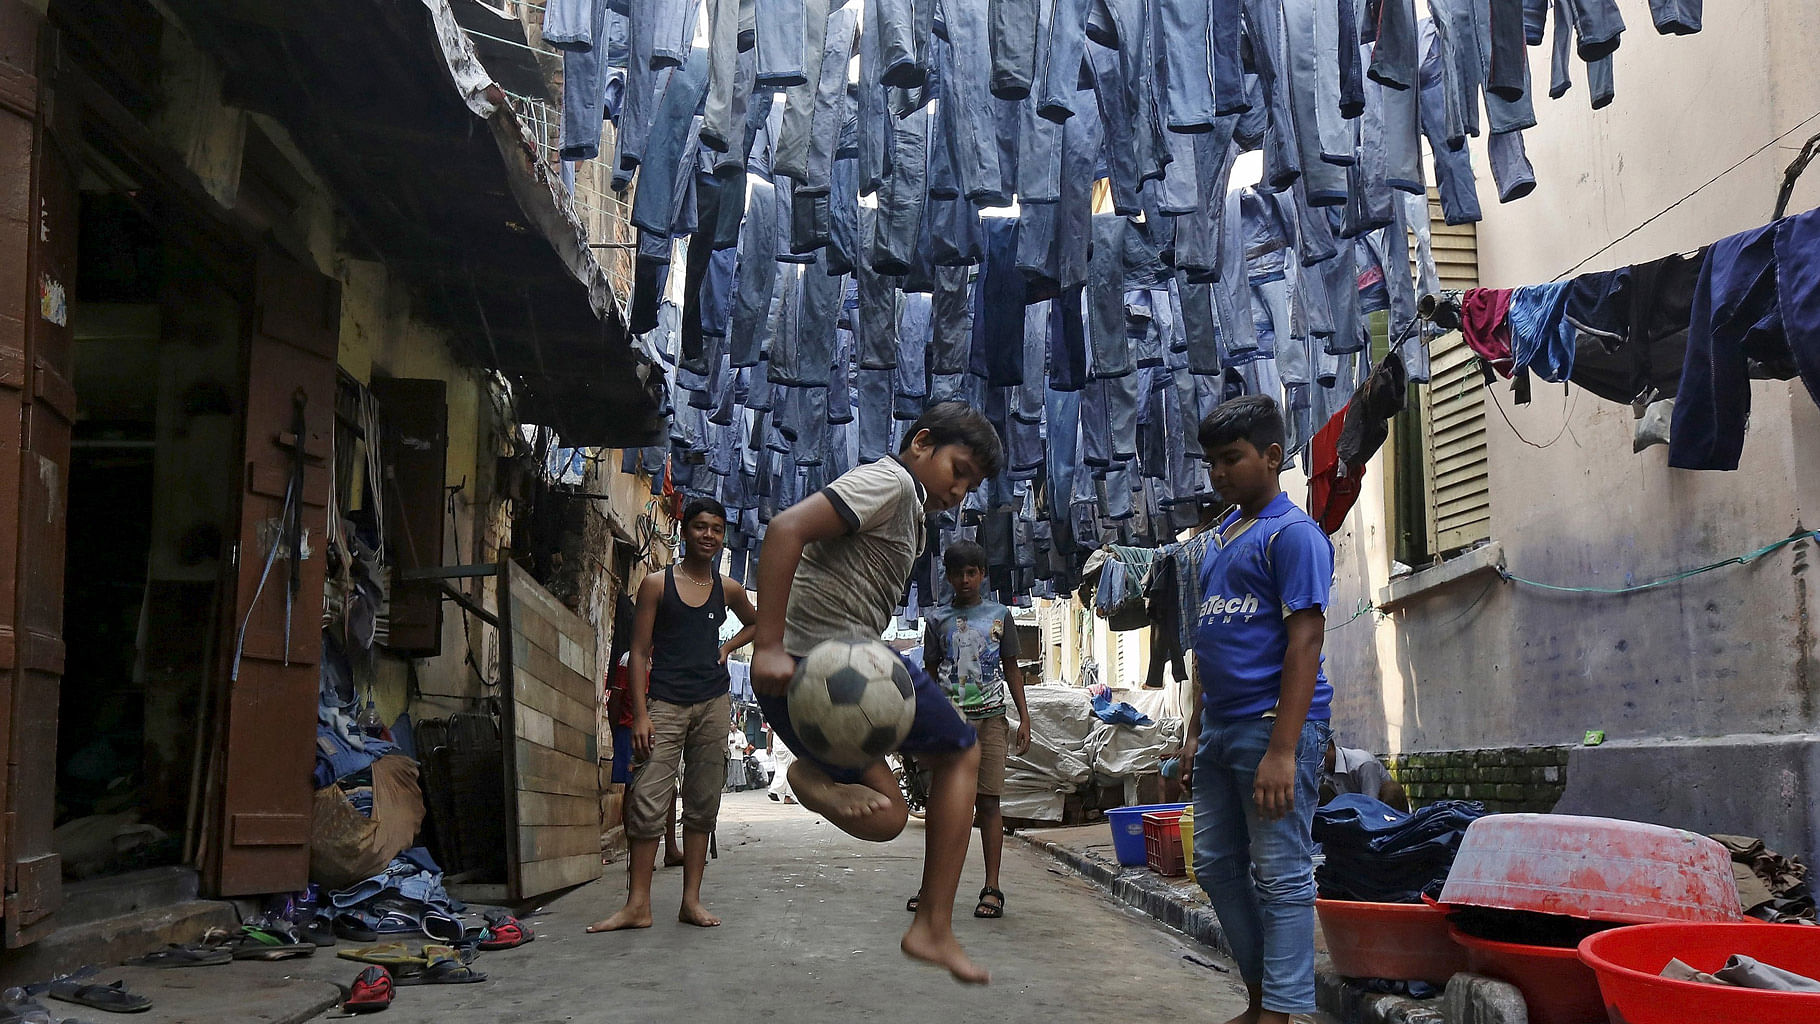 

Mohammad Afroze, 15, playing  soccer in an alley as used pairs of jeans  hang  to dry before they are sold in a second-hand clothes market in Kolkata, India, March 10, 2016.  (Photo: Reuters)